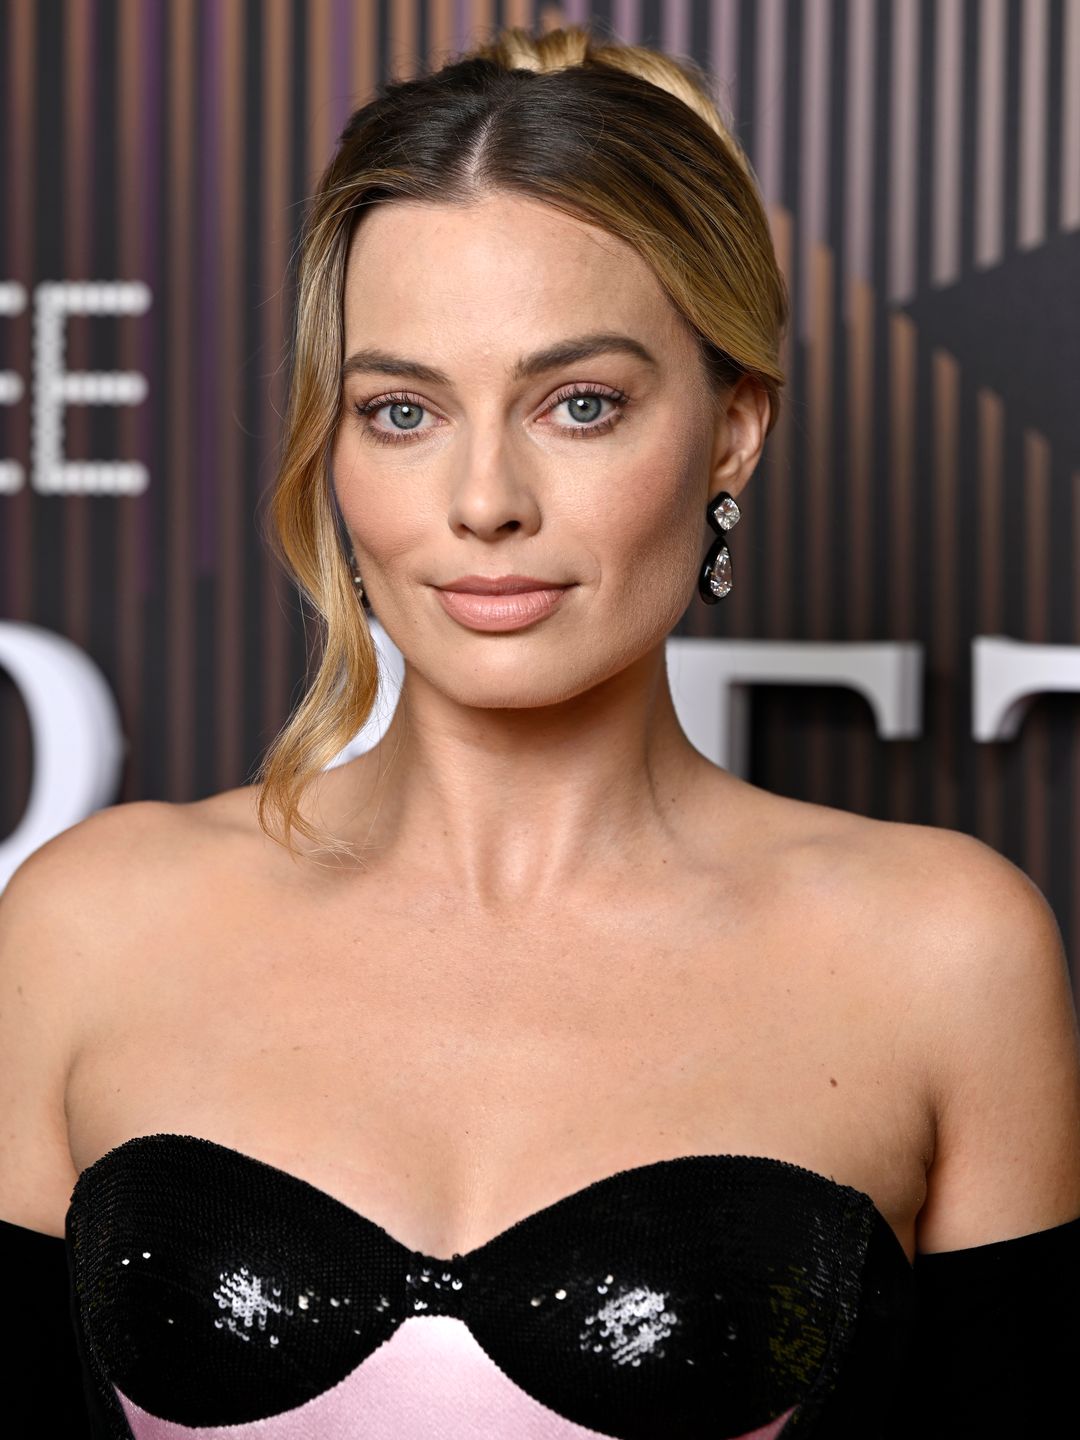 Margot Robbie wearing a black and pink strapless gown at the BAFTAs 